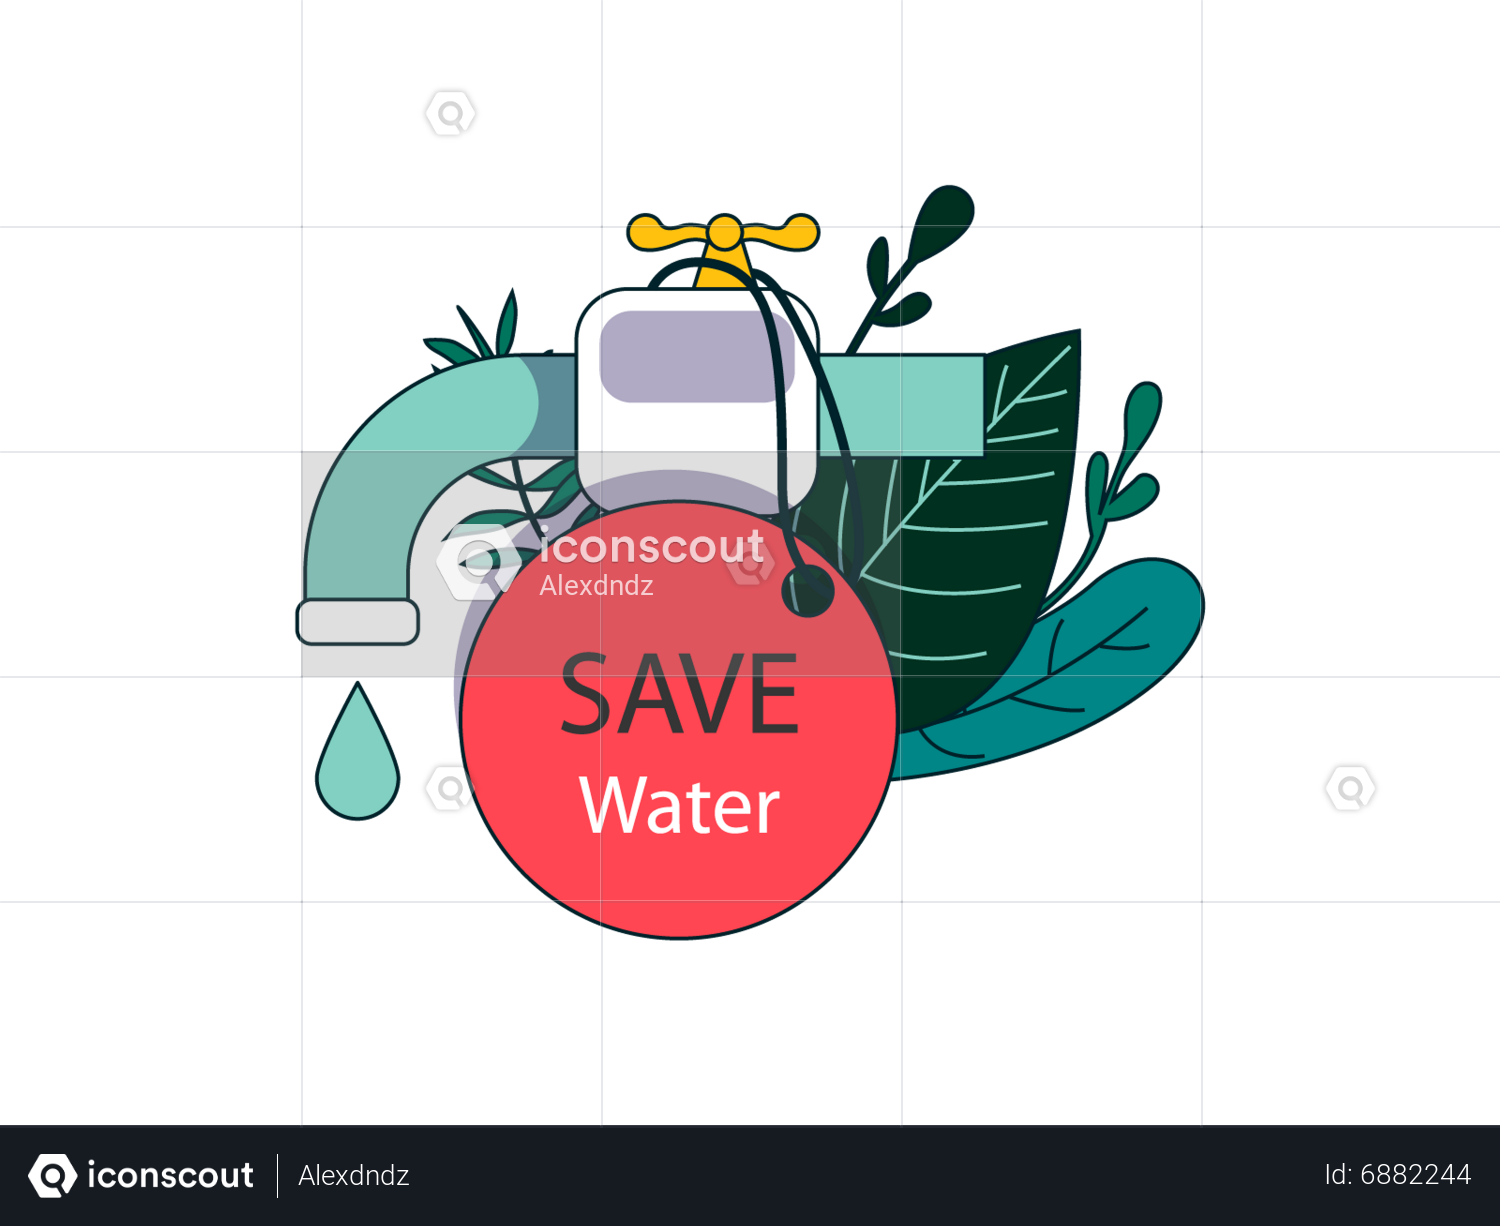 Don't Save Water